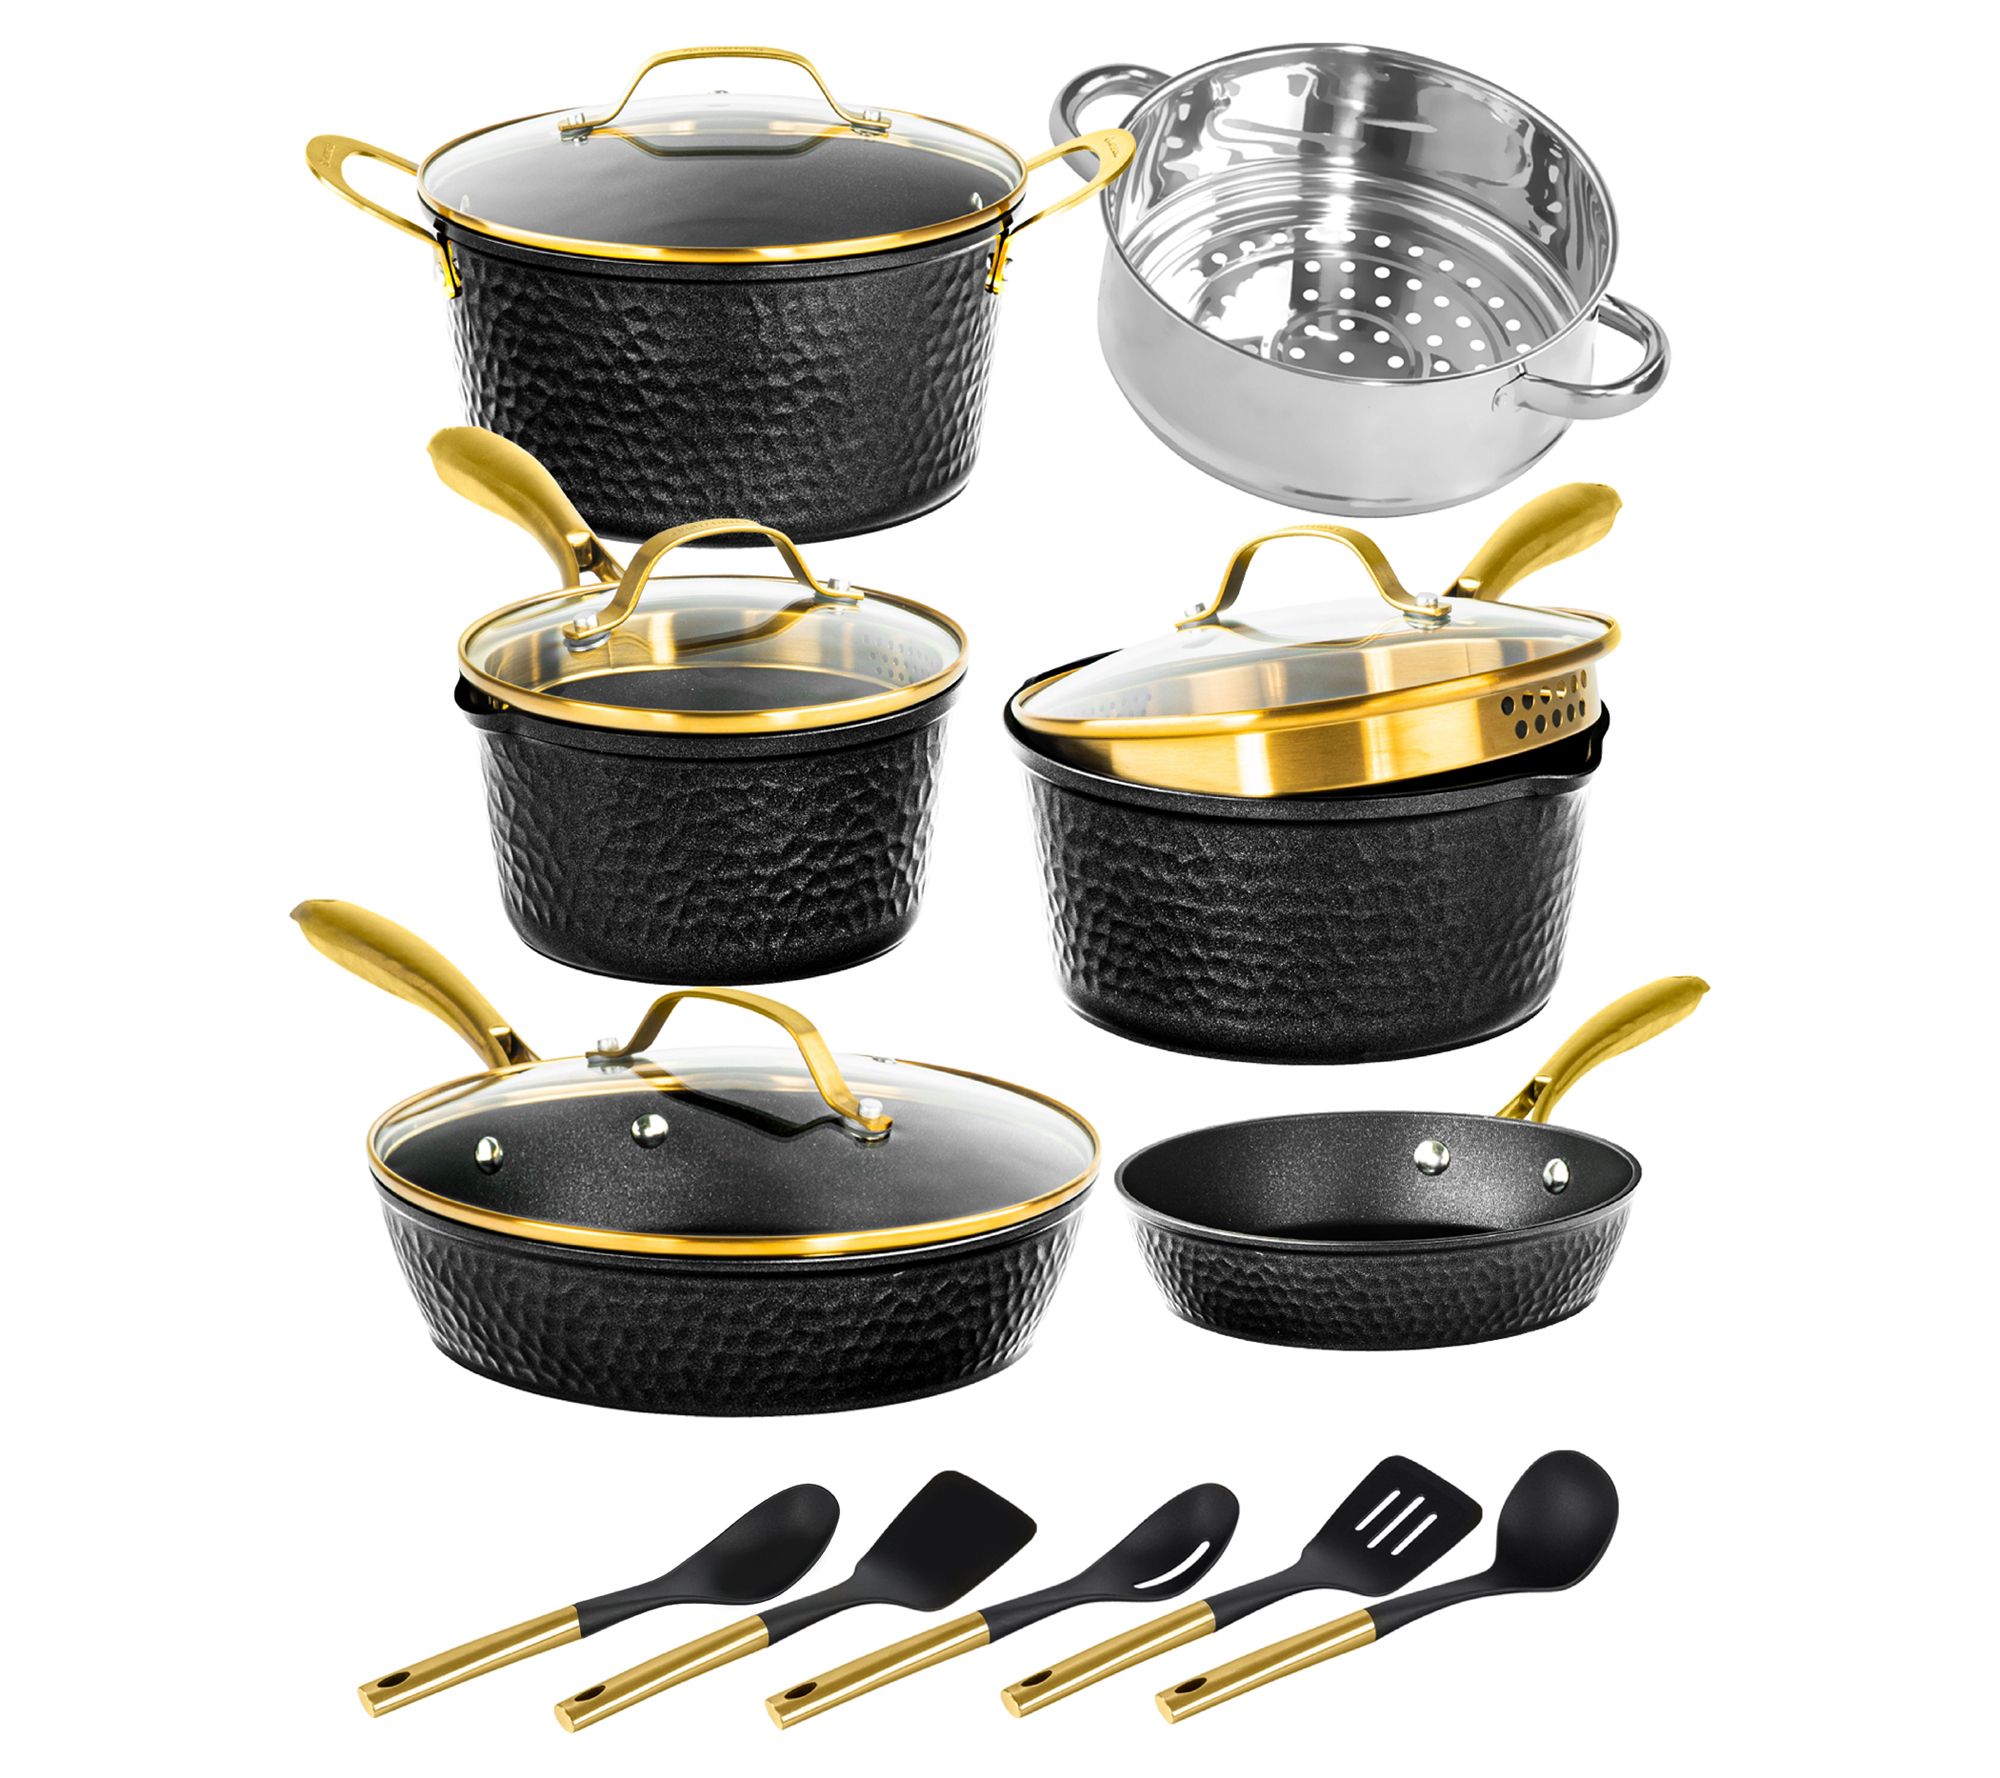 Granitestone Stainless Steel Hammered 10 Piece Nonstick Cookware Set, Stay  Cool Handles, Oven & Dishwasher Safe